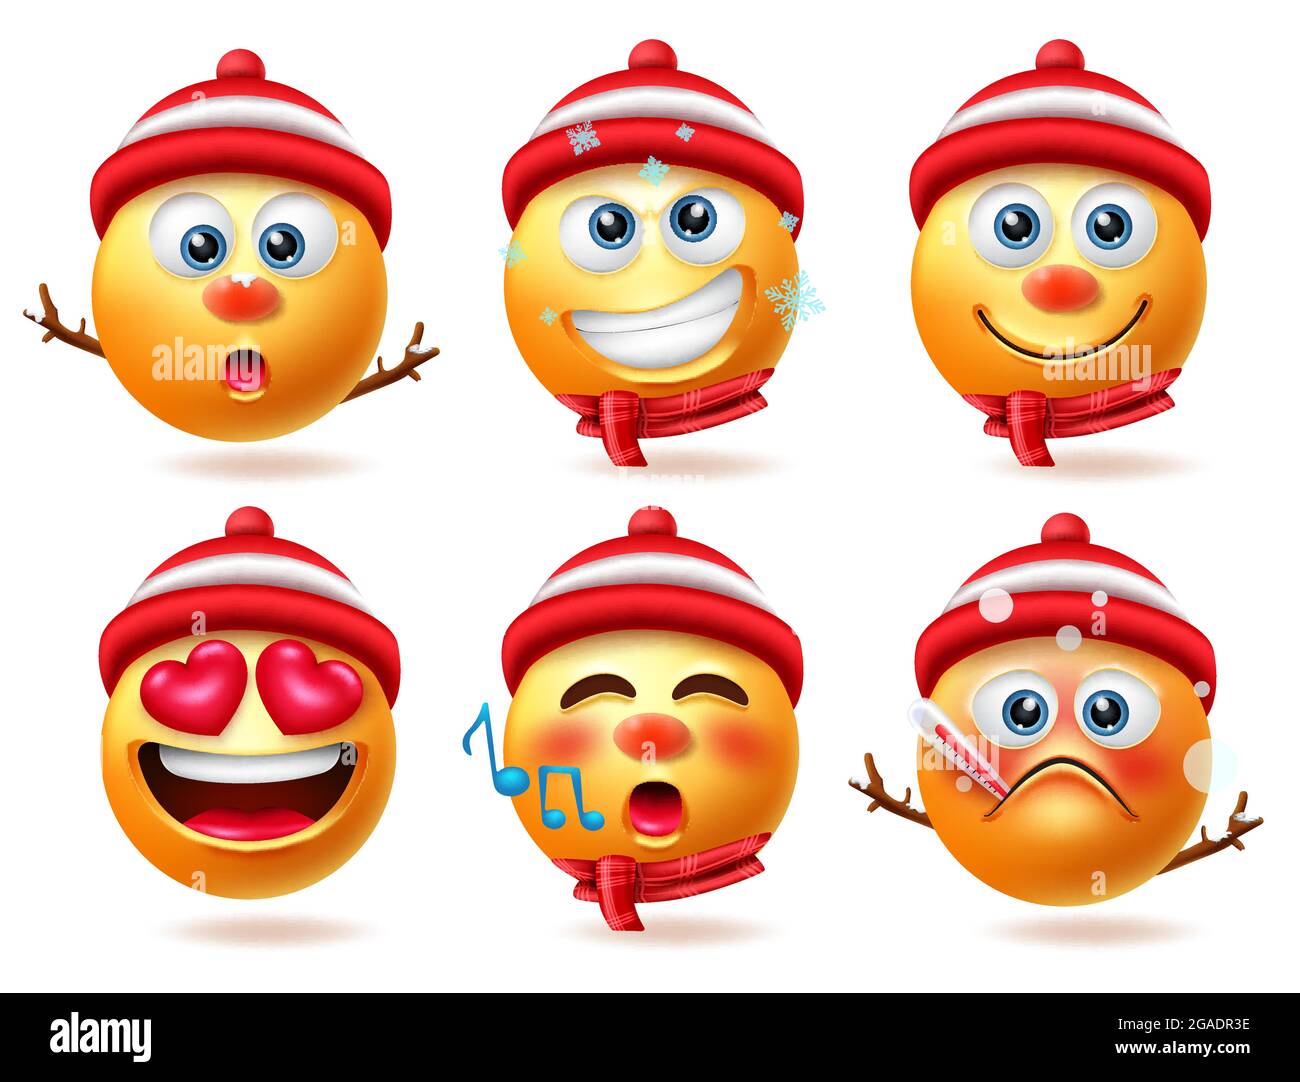 Snowman smiley christmas characters vector set. Snow man smileys 3d character in sick, inlove and singing facial expressions for winter xmas emoji. Stock Vector